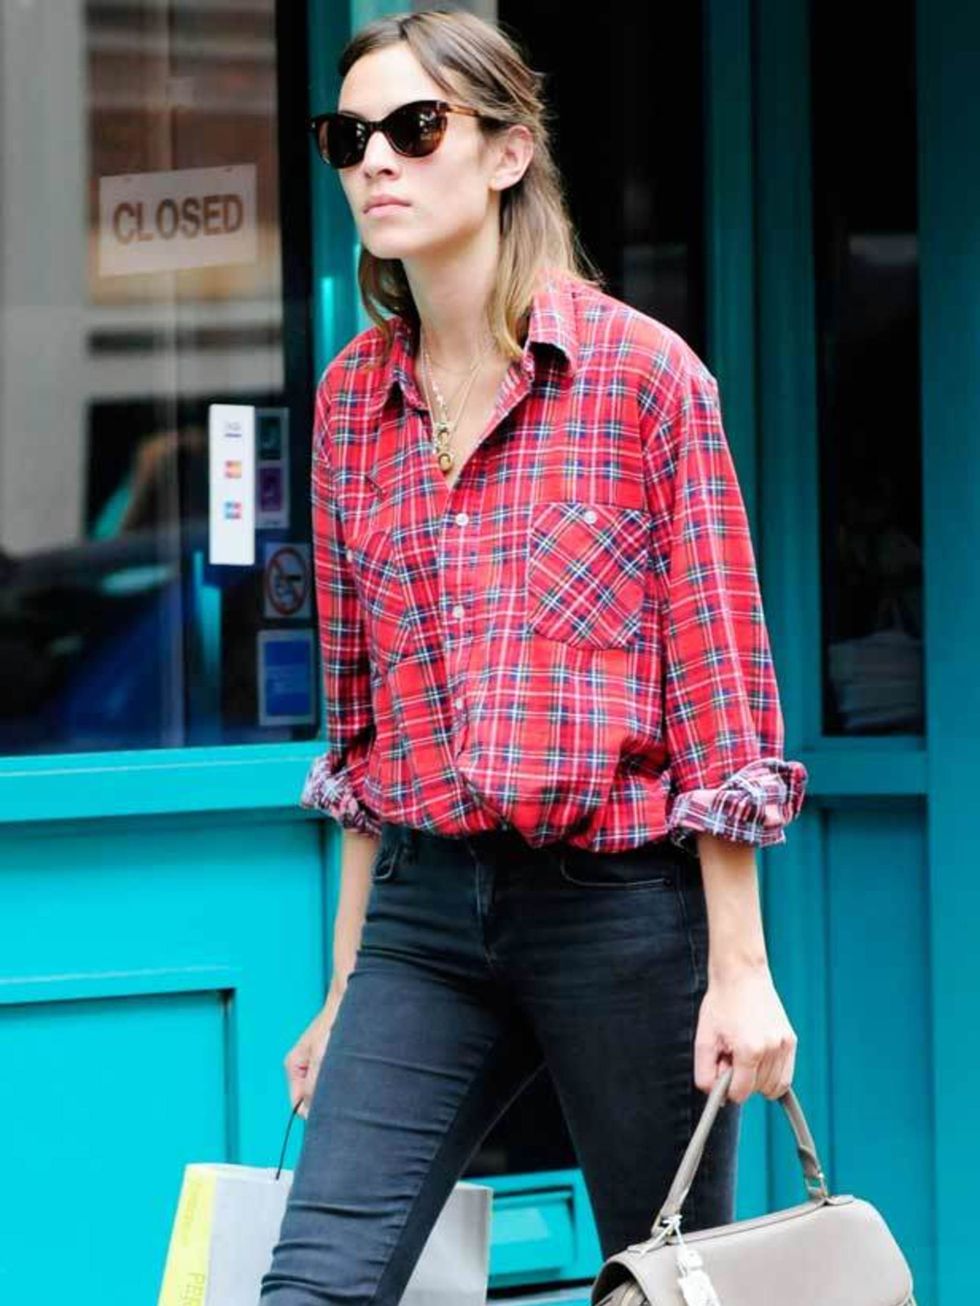 <p><a href="http://www.elleuk.com/starstyle/style-files/%28section%29/Alexa-Chung">Alexa Chung</a> with her <a href="http://www.elleuk.com/catwalk/collections/louis-vuitton/">Louis Vuitton</a> Neo Speedy PM bag in New York</p>